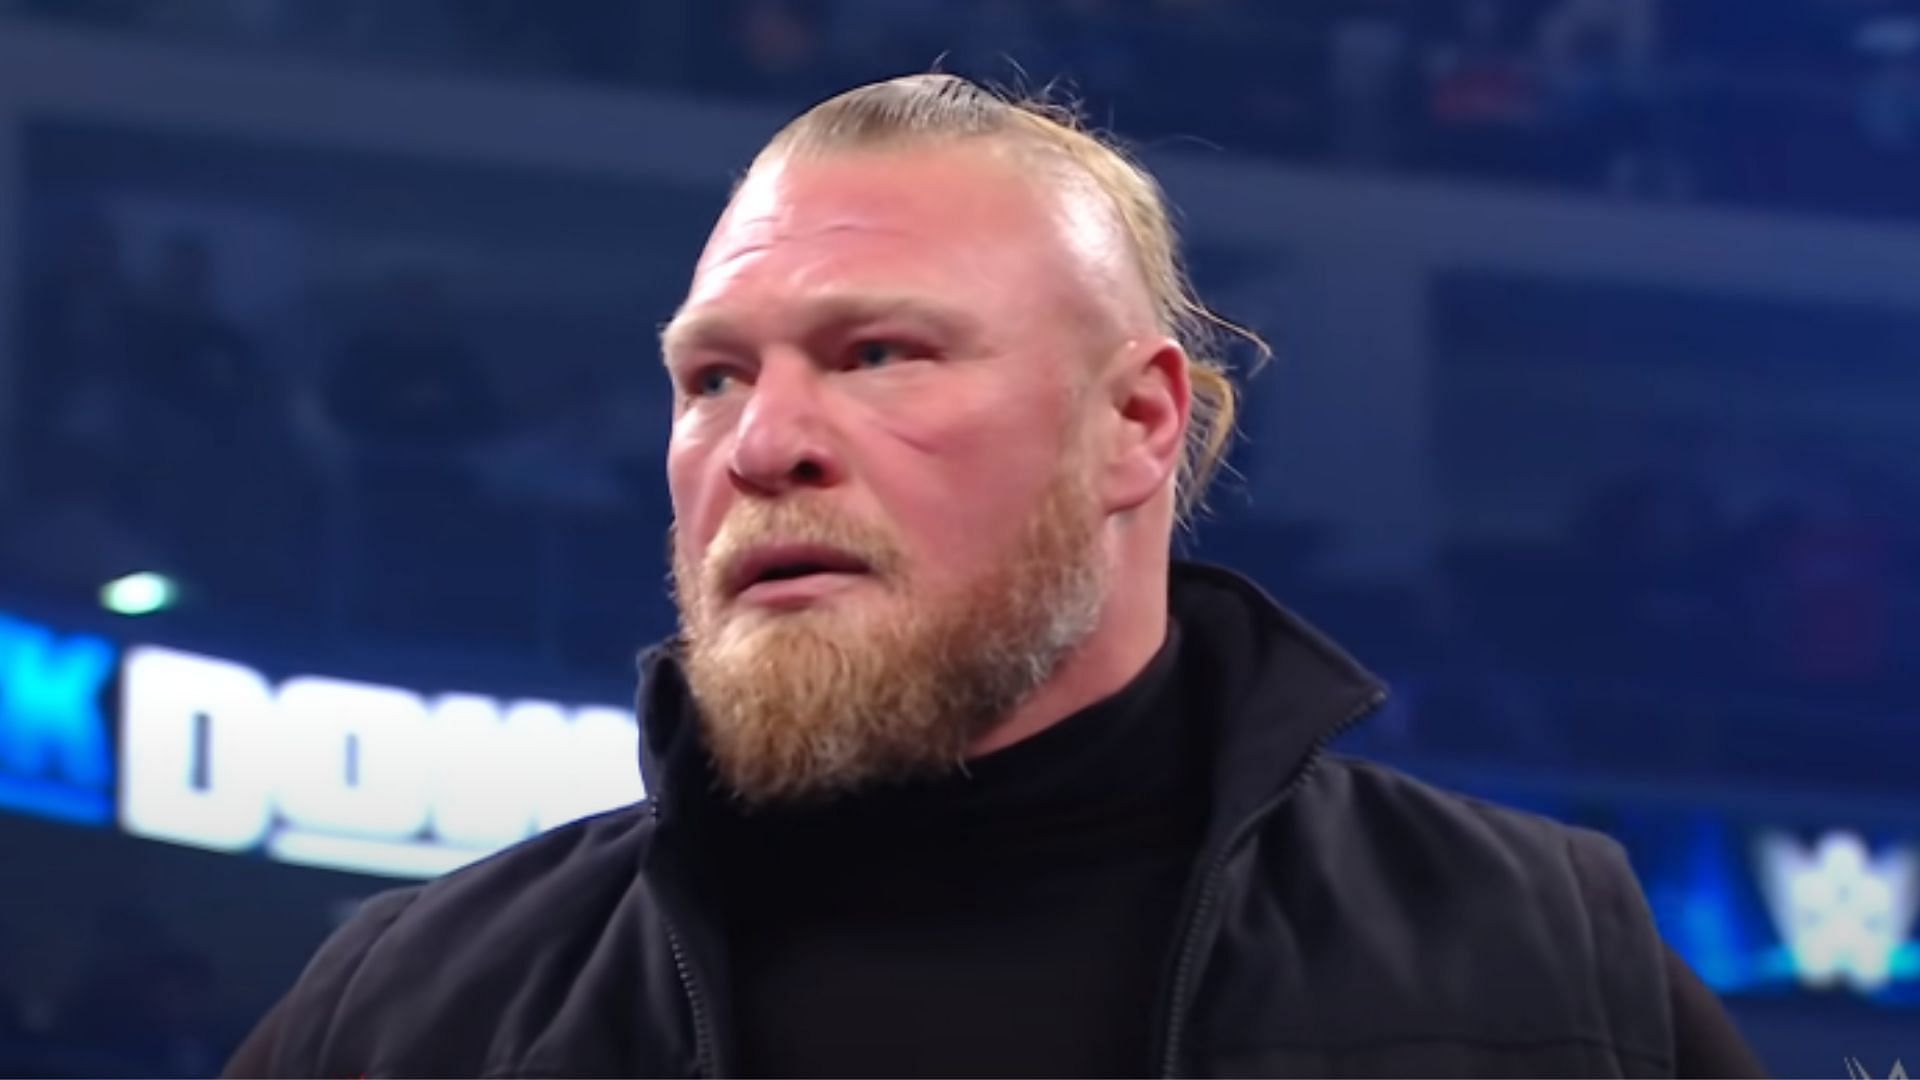 Brock Lesnar emerged victorious at Elimination Chamber 2022.